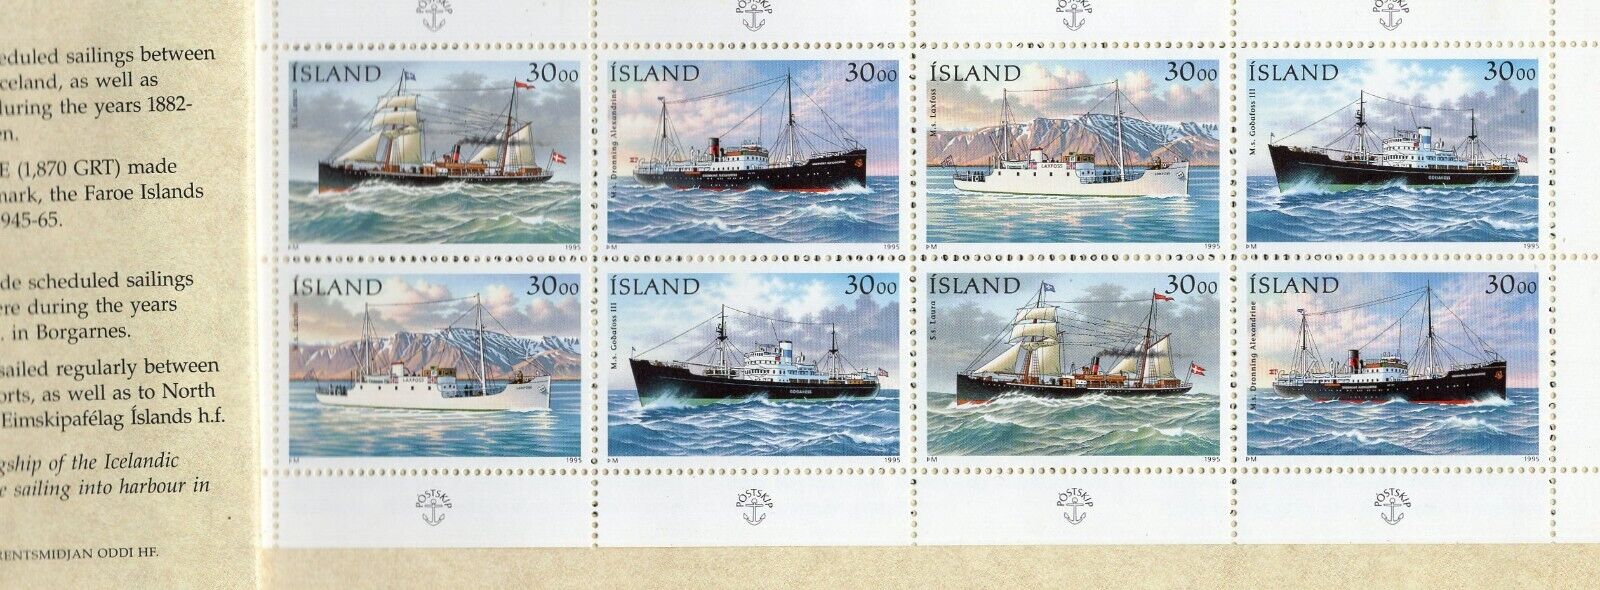 ICELAND 1995 SHIPS SOUVENIR BOOKLET W/PANE OF 8 STAMPS MNH